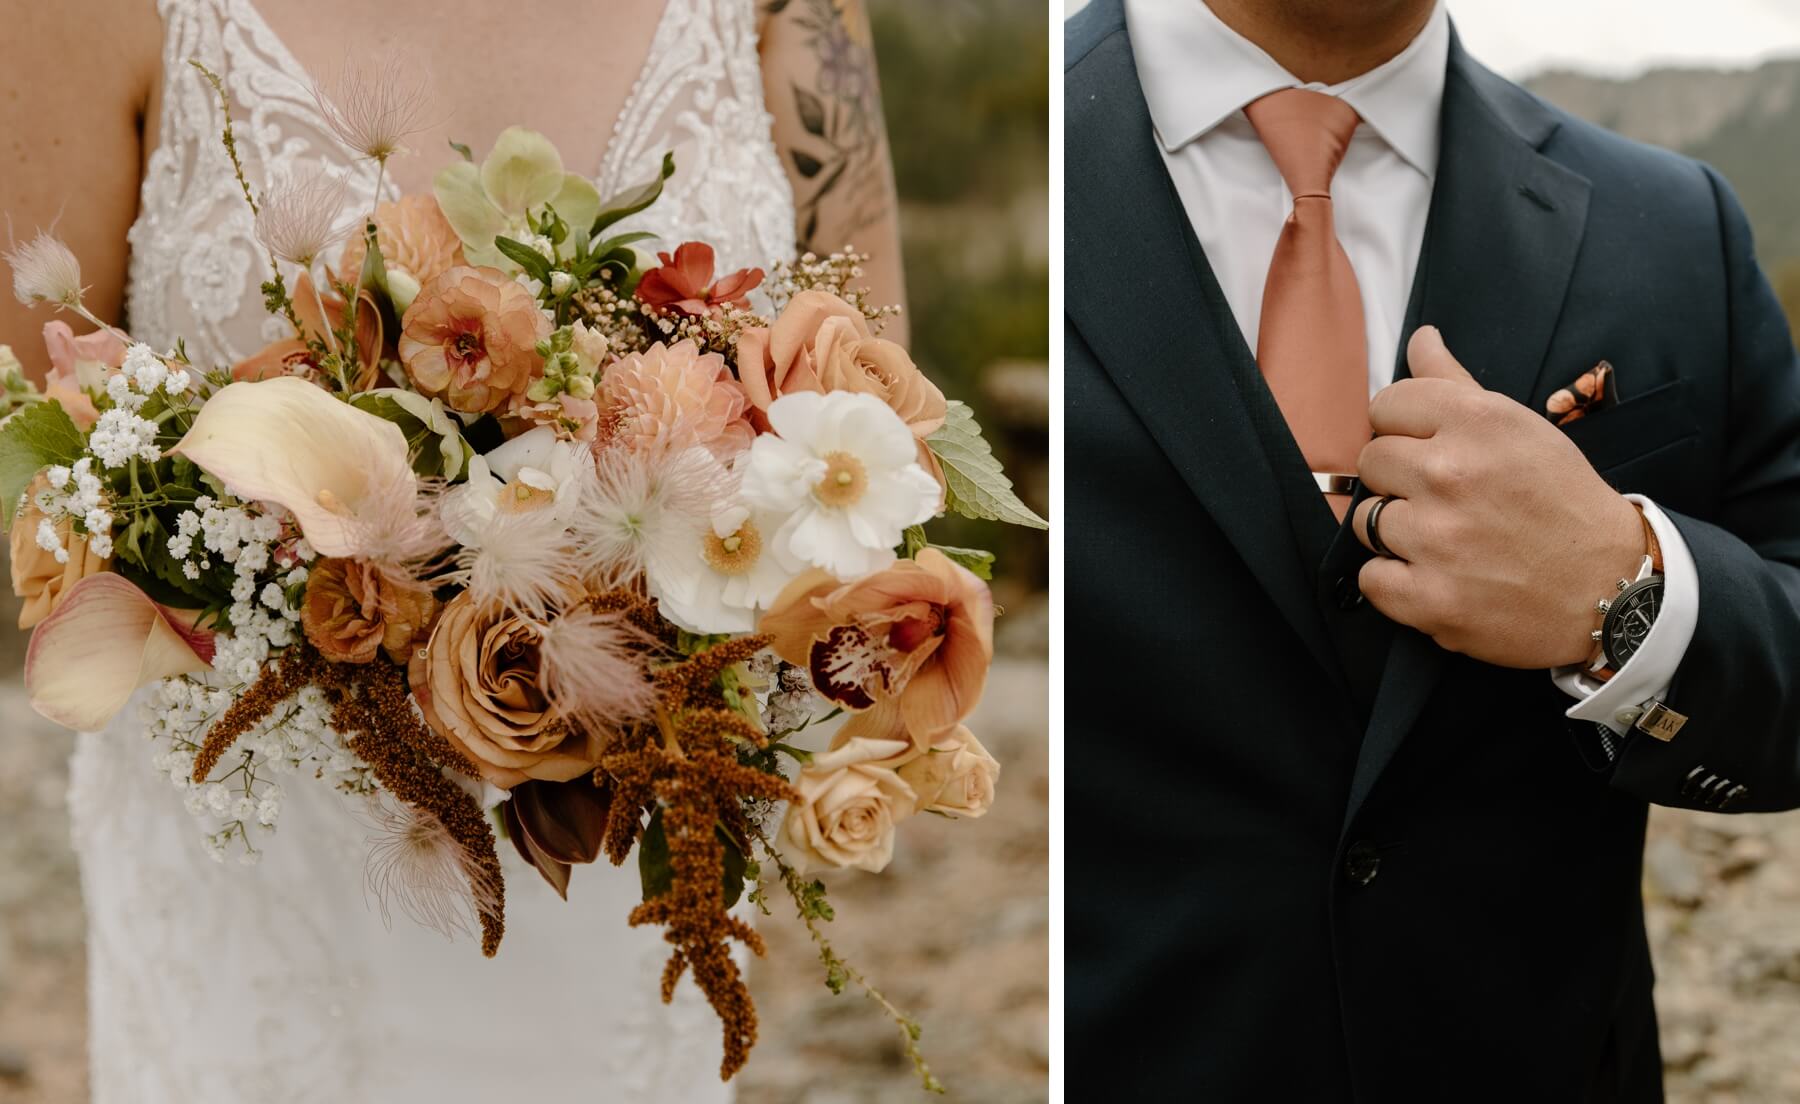 Bride's boho bouquet full of white, peach, and pink flowers | groom wearing navy suit with terracotta tie | McArthur Weddings and Events